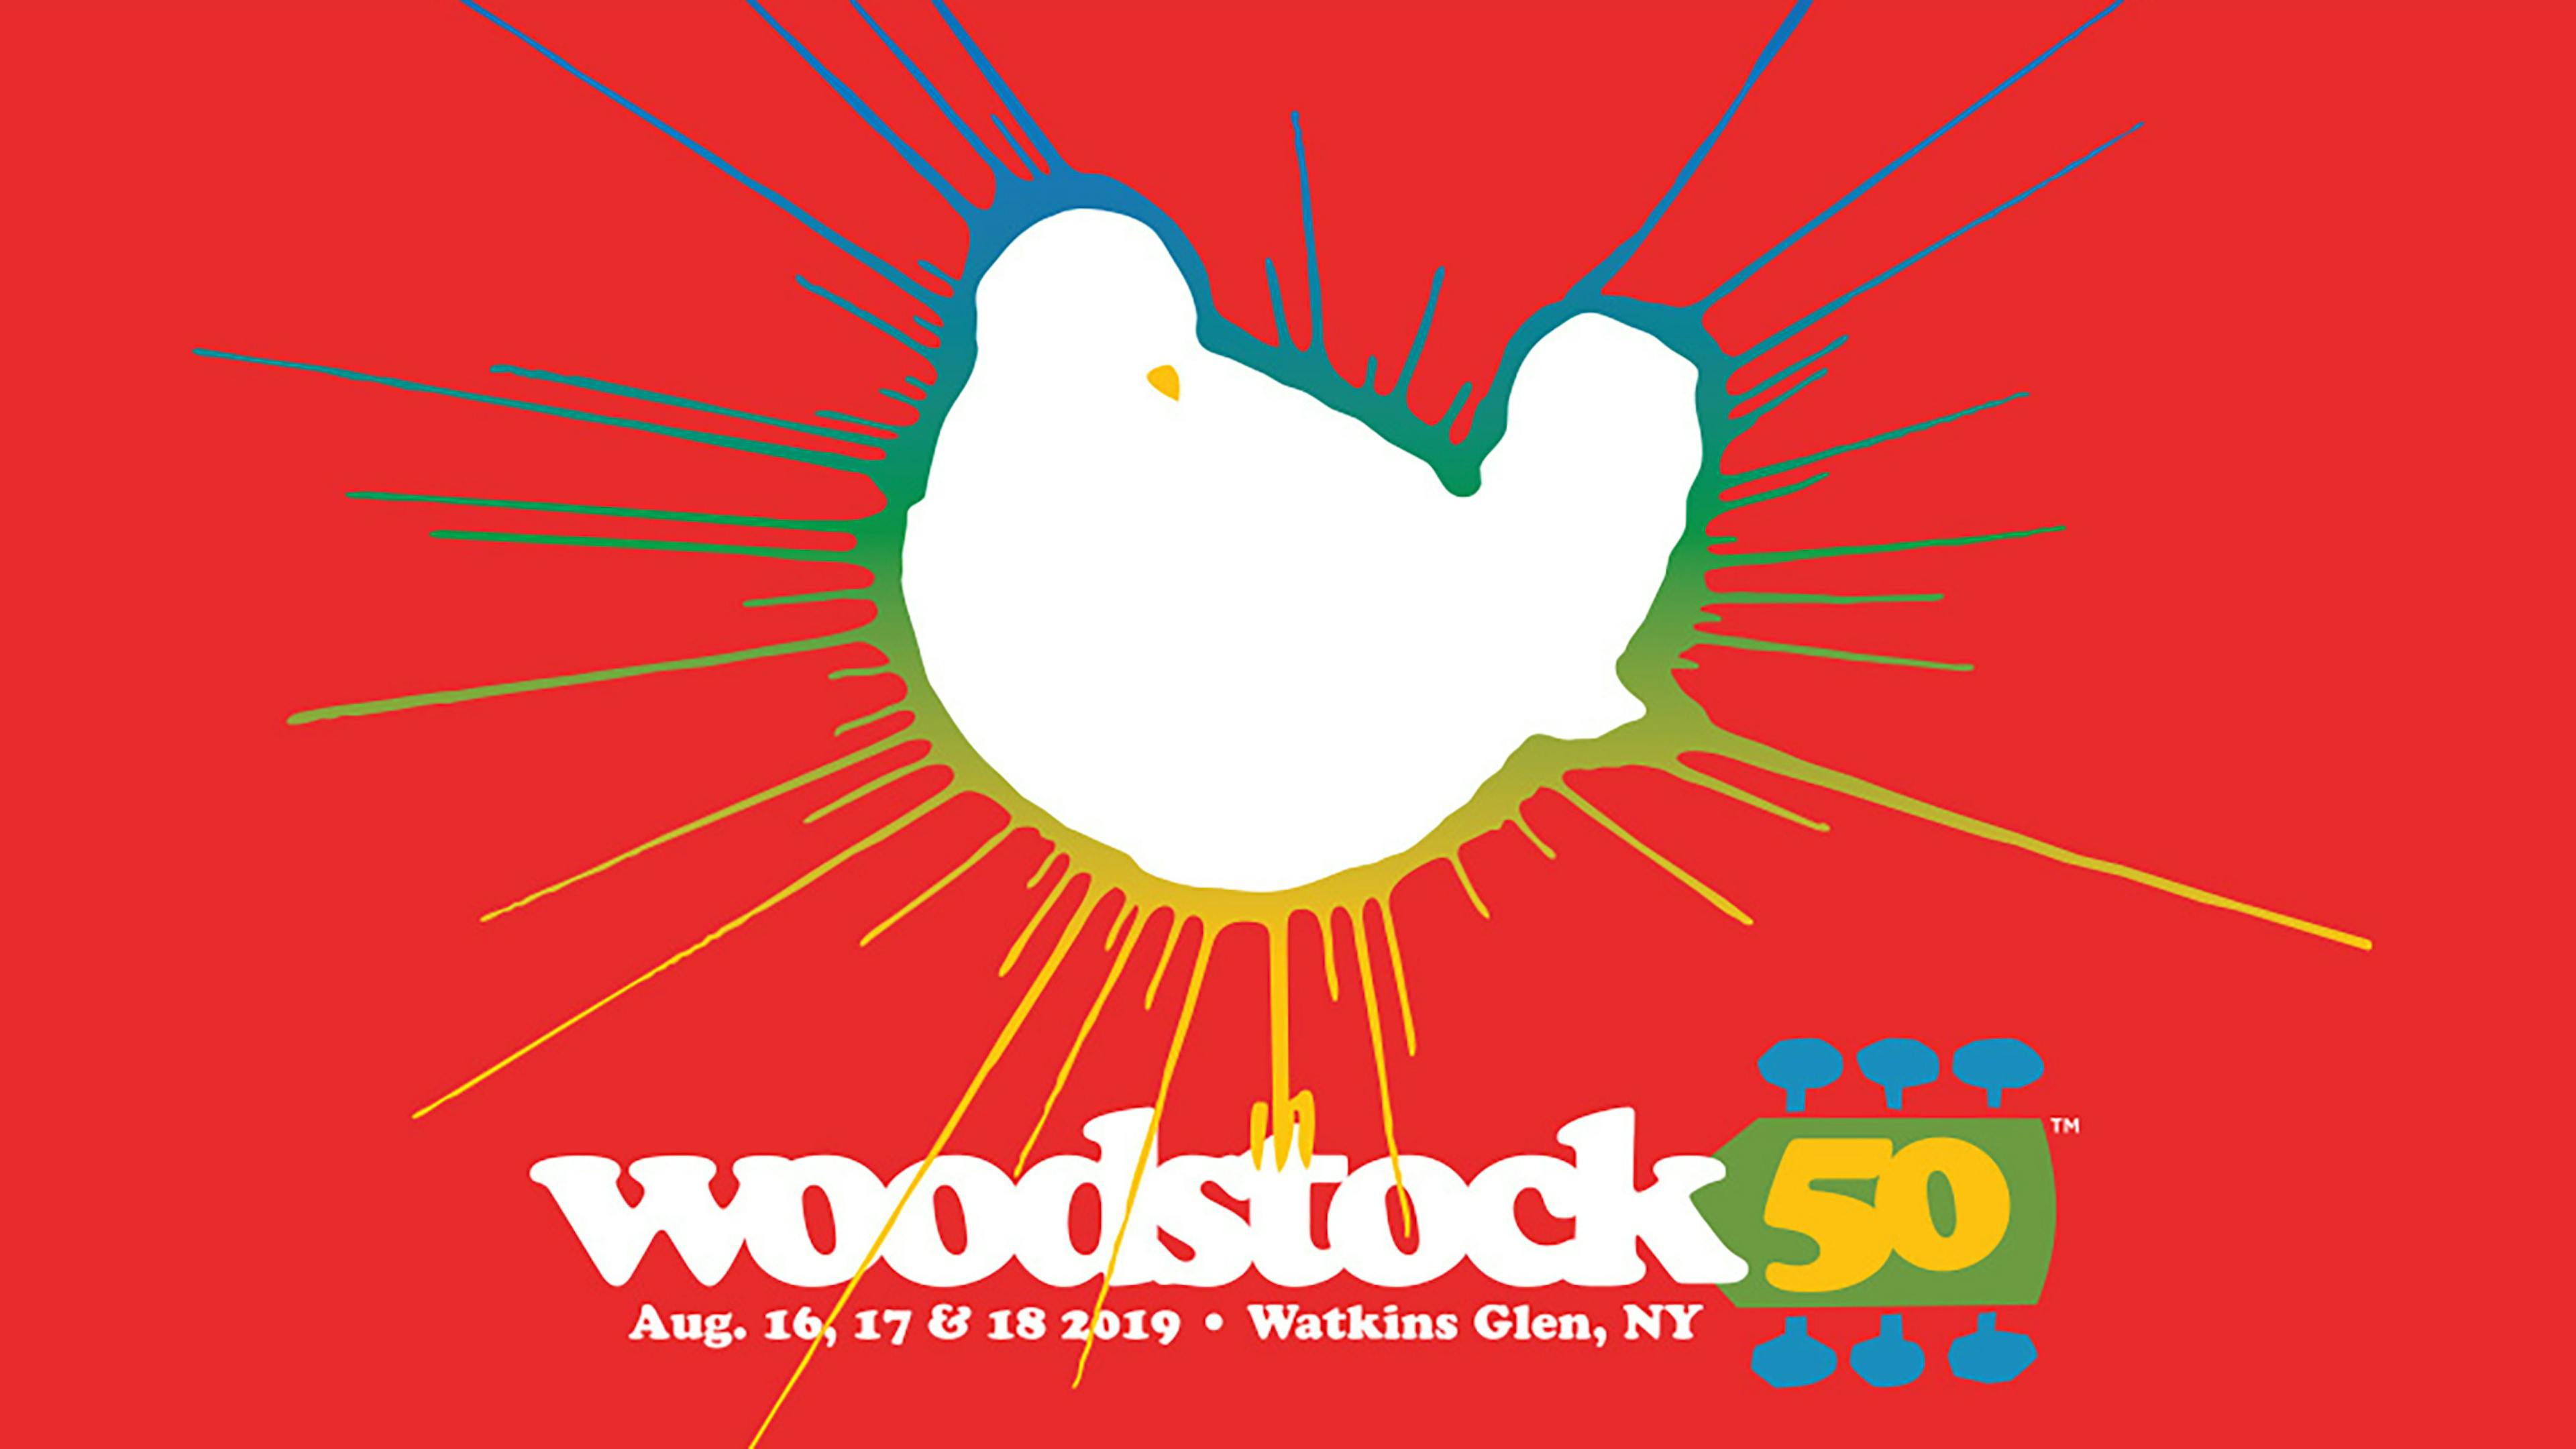 Woodstock 50 Has Officially Been Canceled